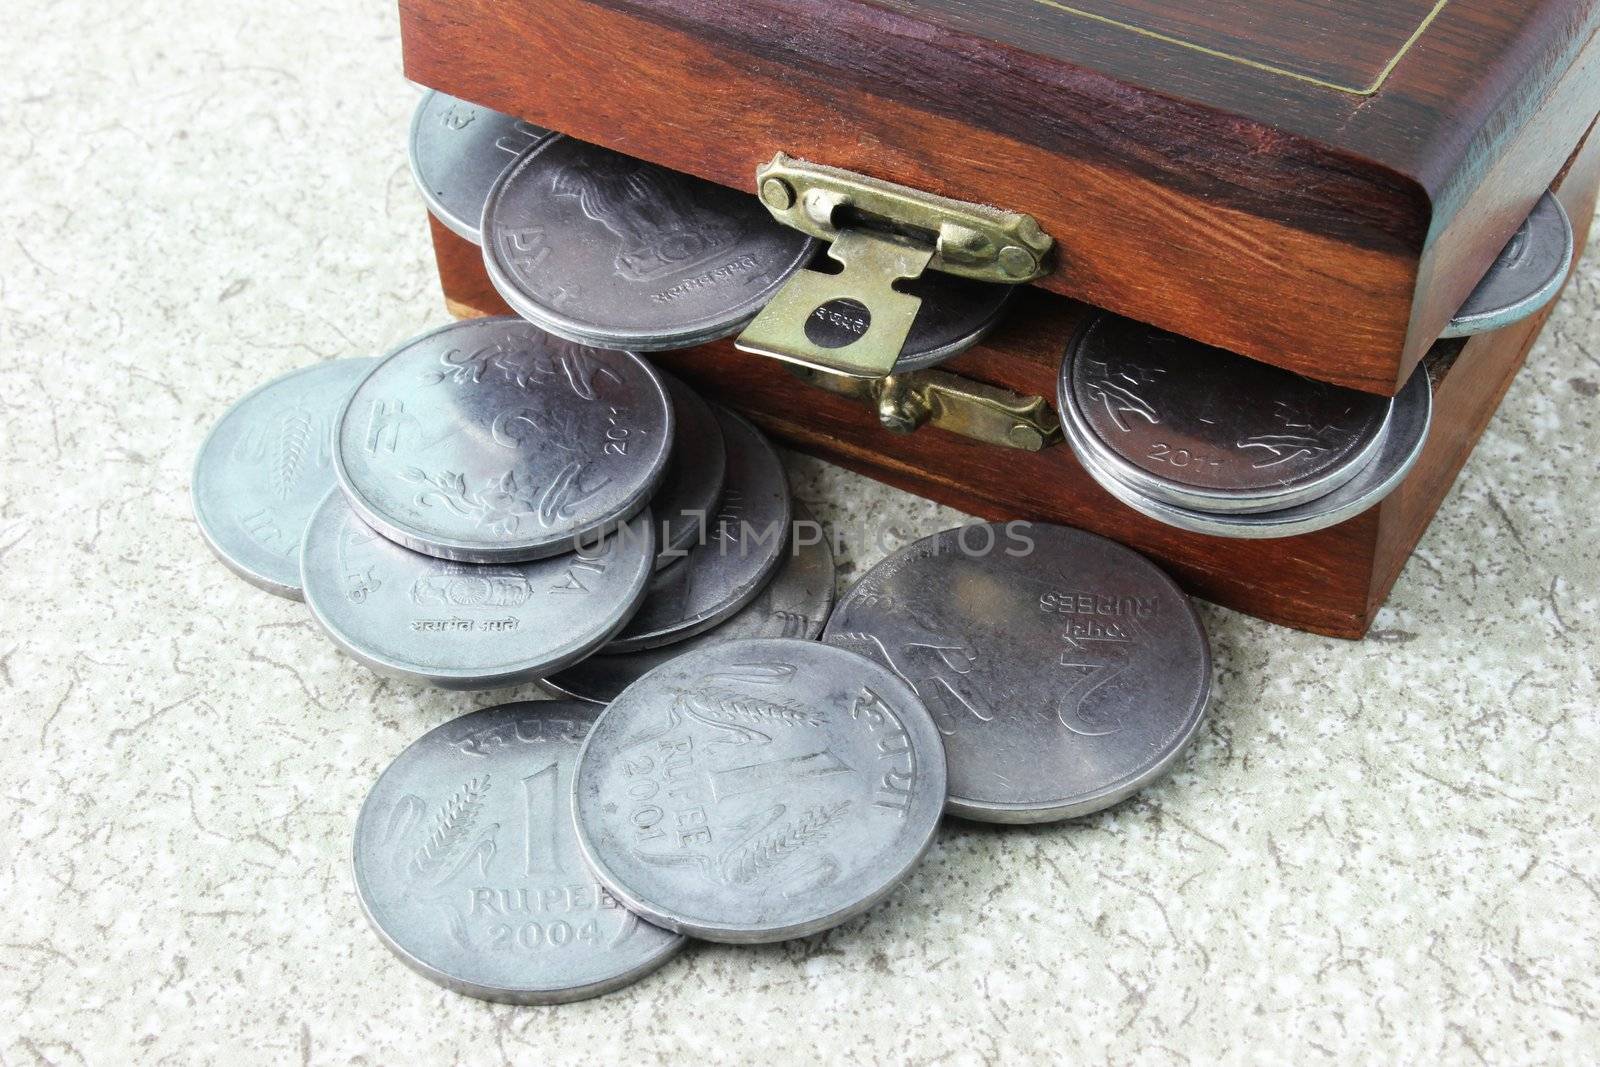 Indian currency coins overflowing from a wooden chest